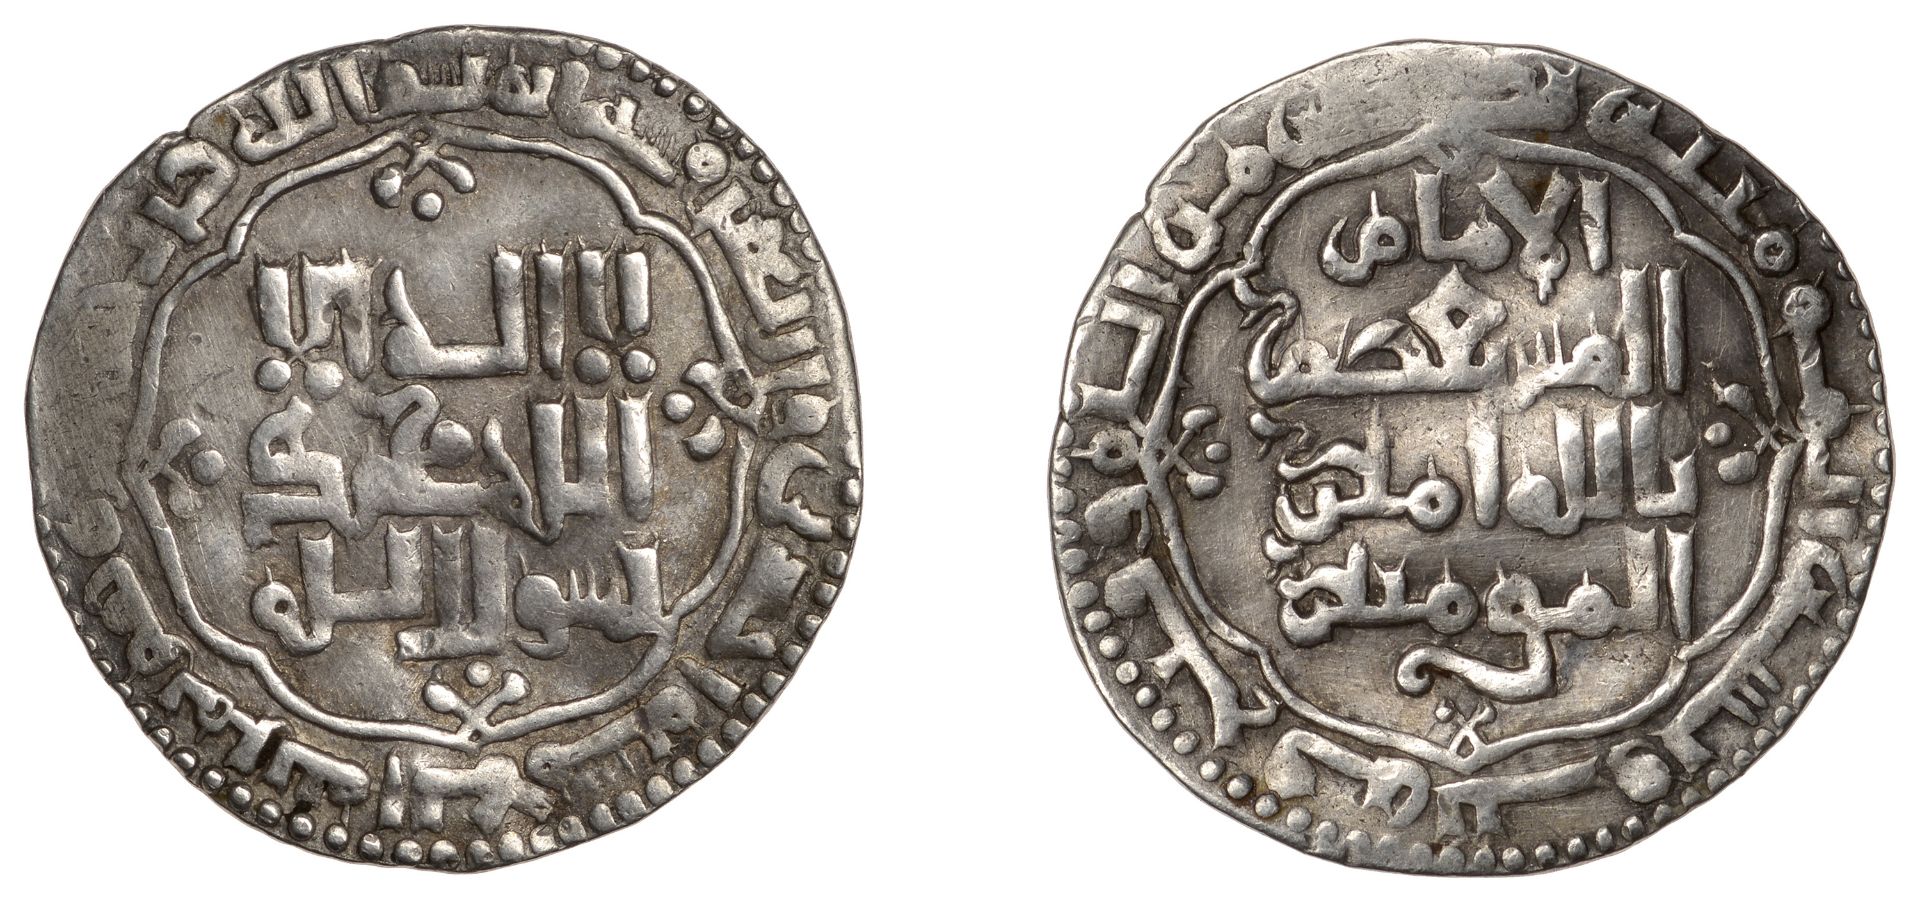 The Hon. Robert Erskine Collection, Part I: Early Persian, Islamic and Crusader Coins